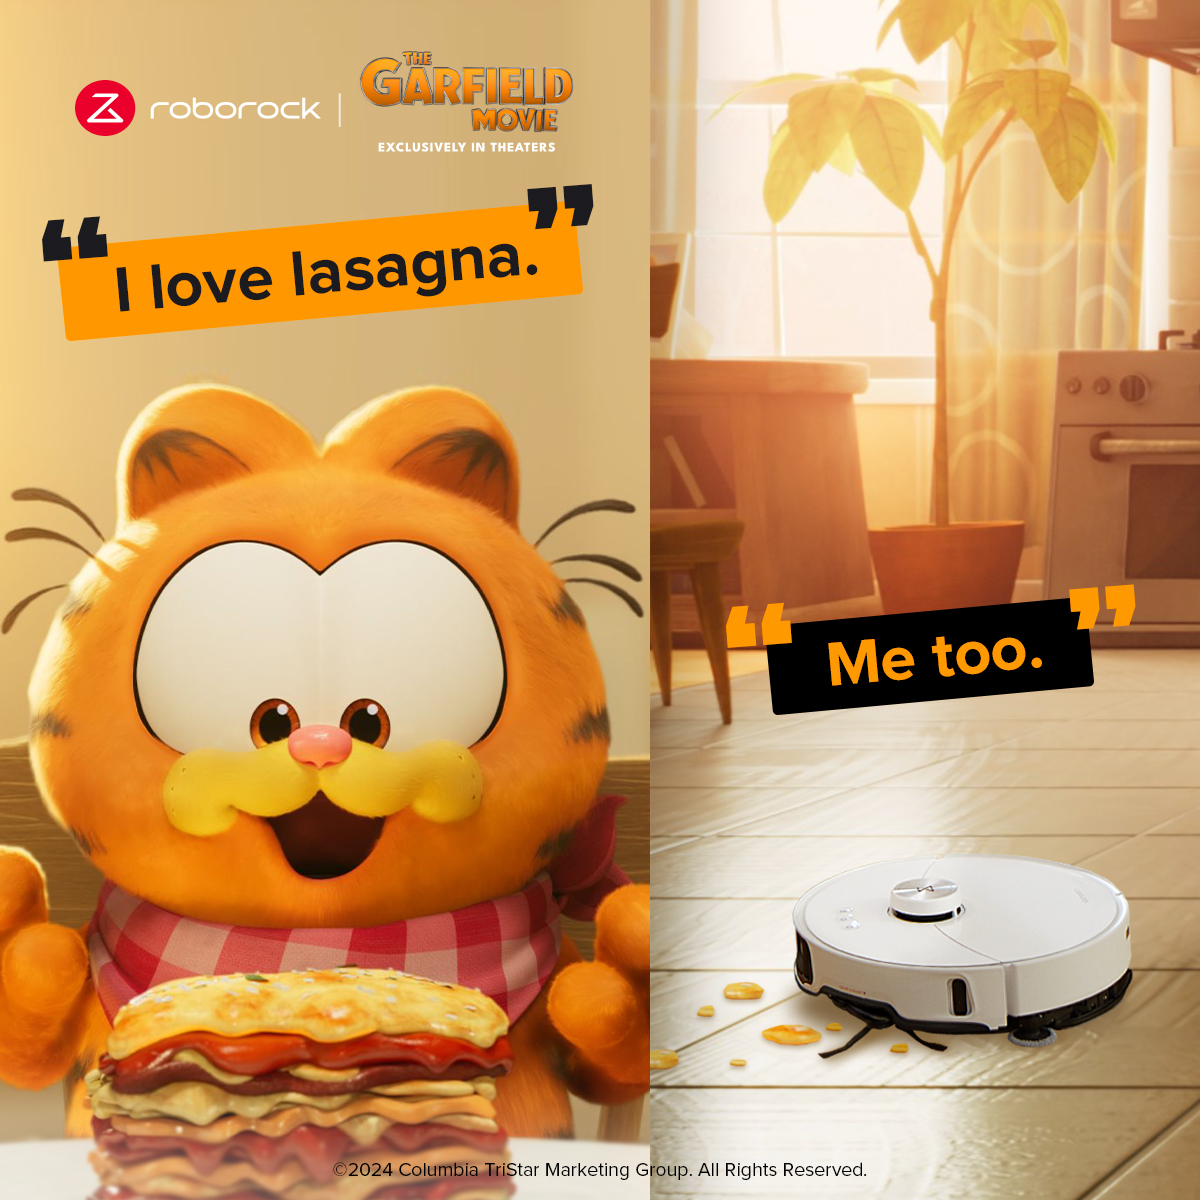 It's no secret that Garfield adores lasagna, and it seems Roborock has a taste for it too. 😺🍝 Dive into The Garfield Movie at a theater near you!🎬 #Garfield #TheGarfield #RoborockXGarfield #GarfieldMovie #RobotVacuum #Foodie #Lasagna #Companion